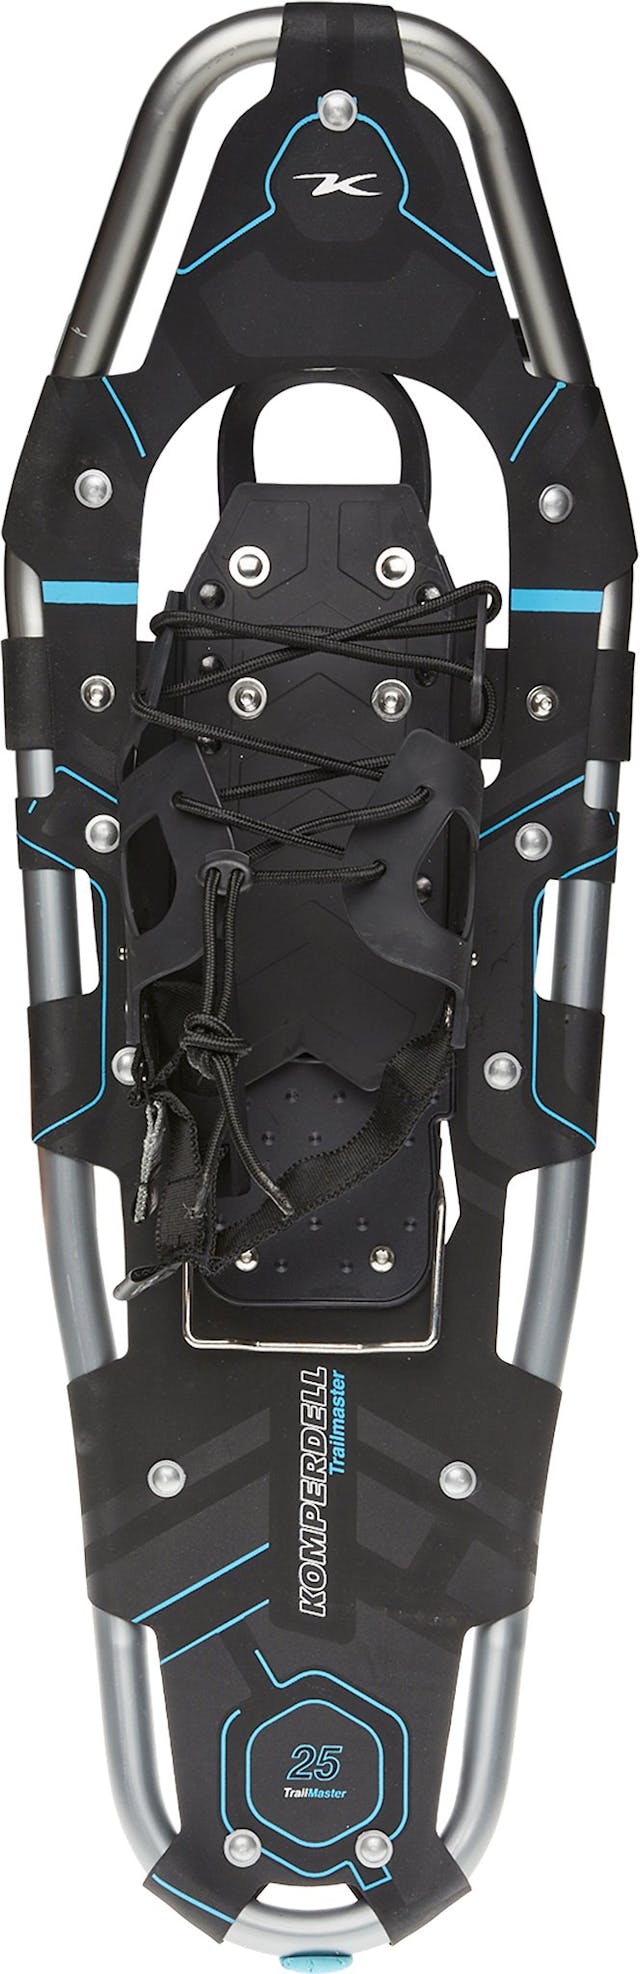 Product image for Trailmaster Snowshoe 25 in - Unisex